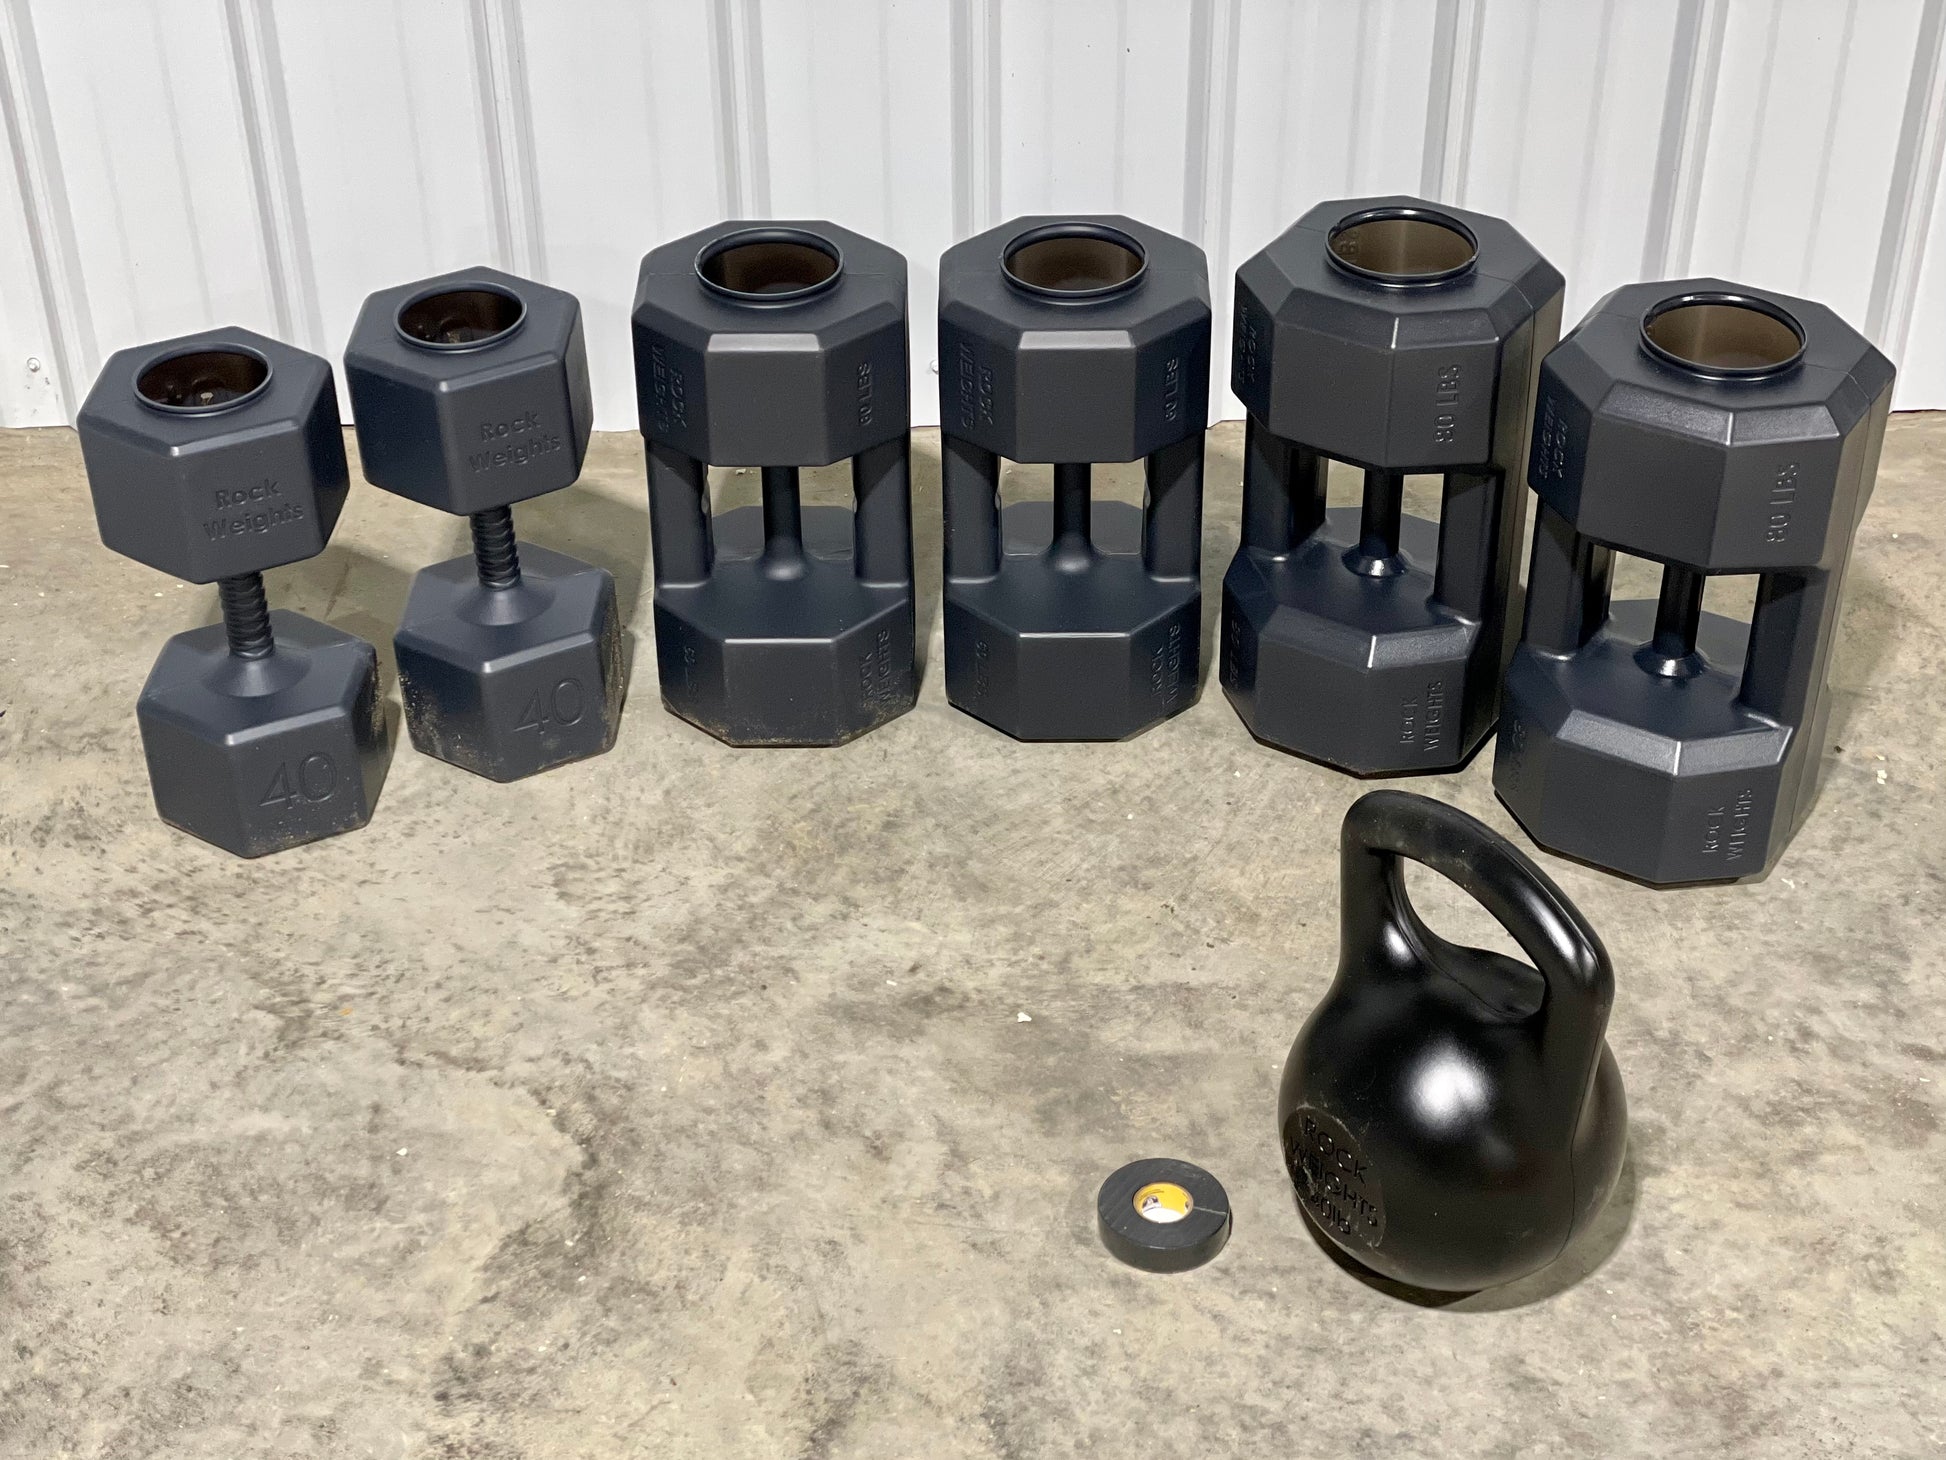 Dumbbell Mold (40, 60, or 80 lbs) – Rock Weights